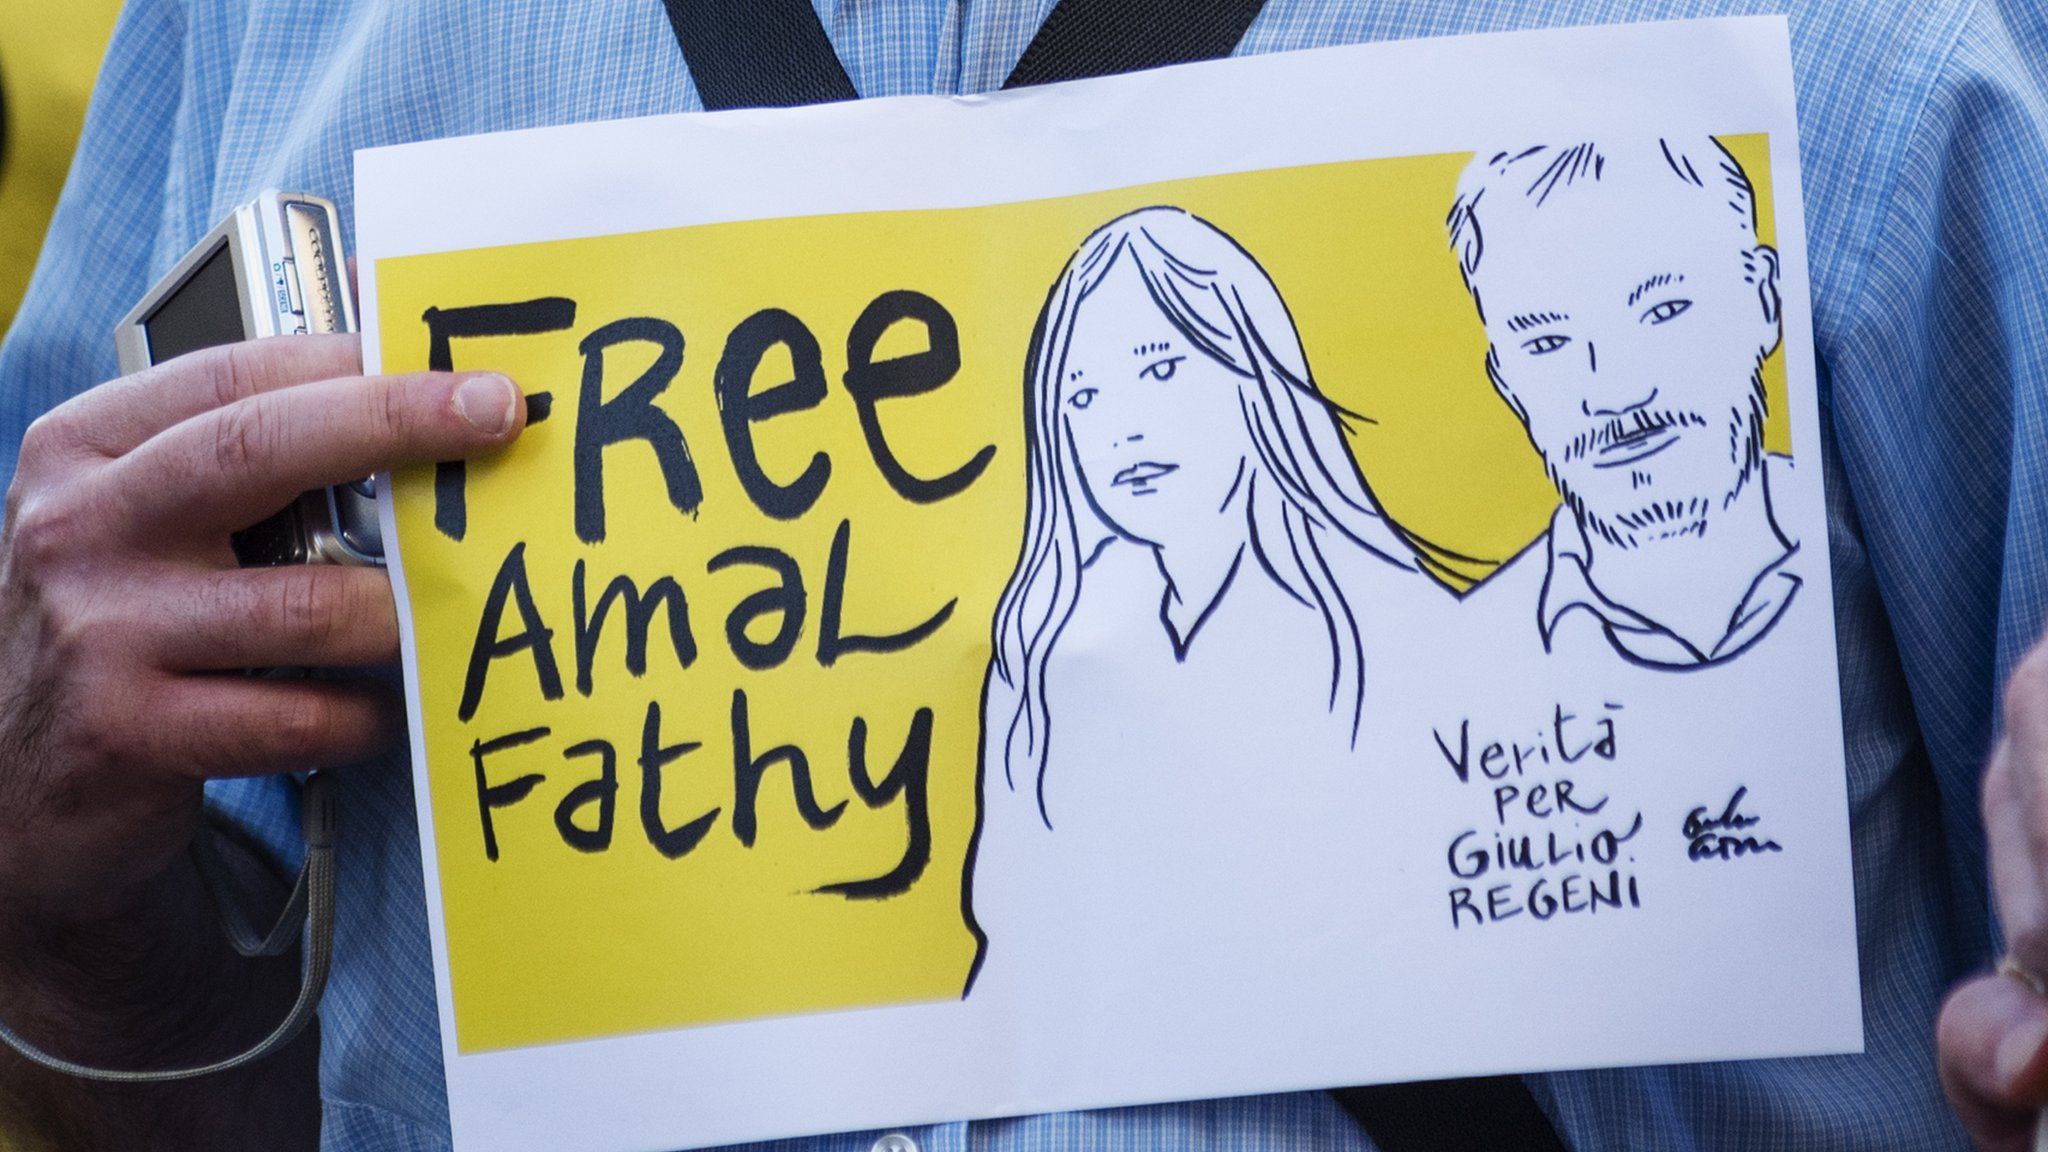 Rights activists hold a demonstration for the release of Amal Fathy. File photo from 12 September 2018